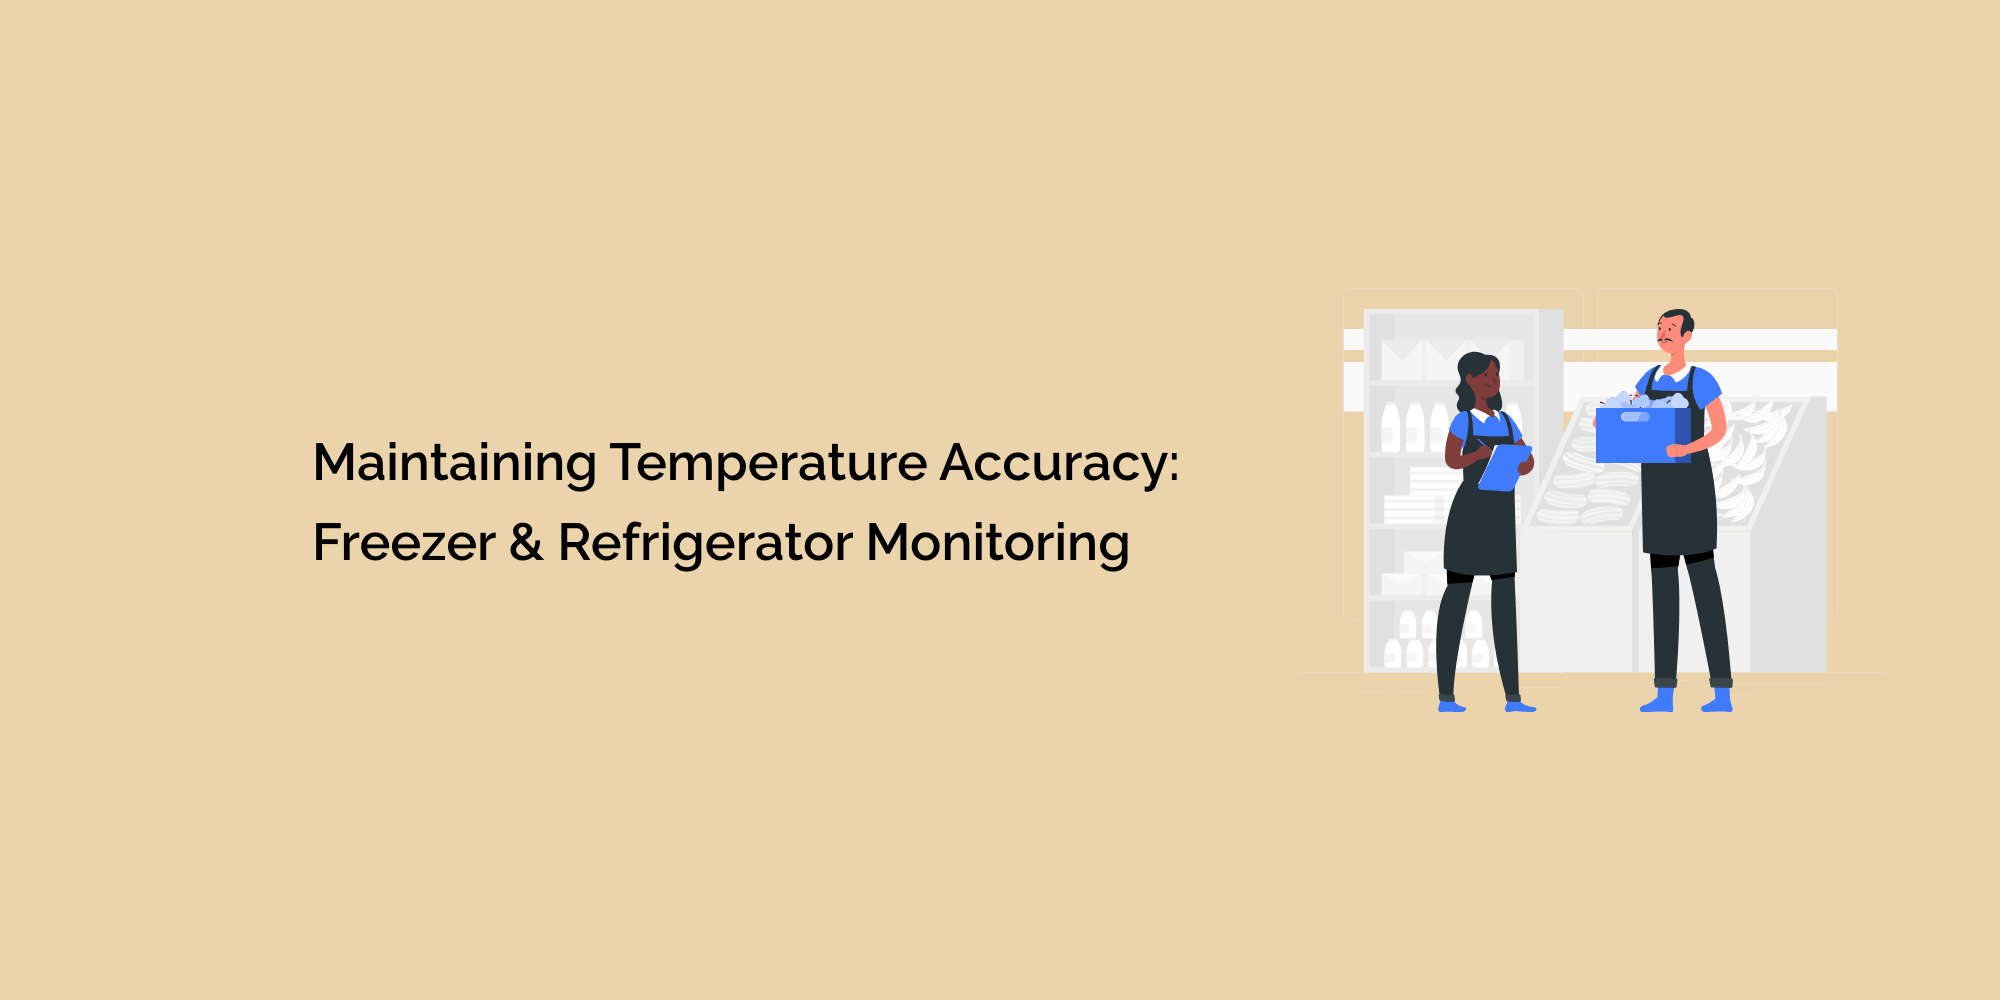 Maintaining Temperature Accuracy: Freezer and Refrigerator Monitoring